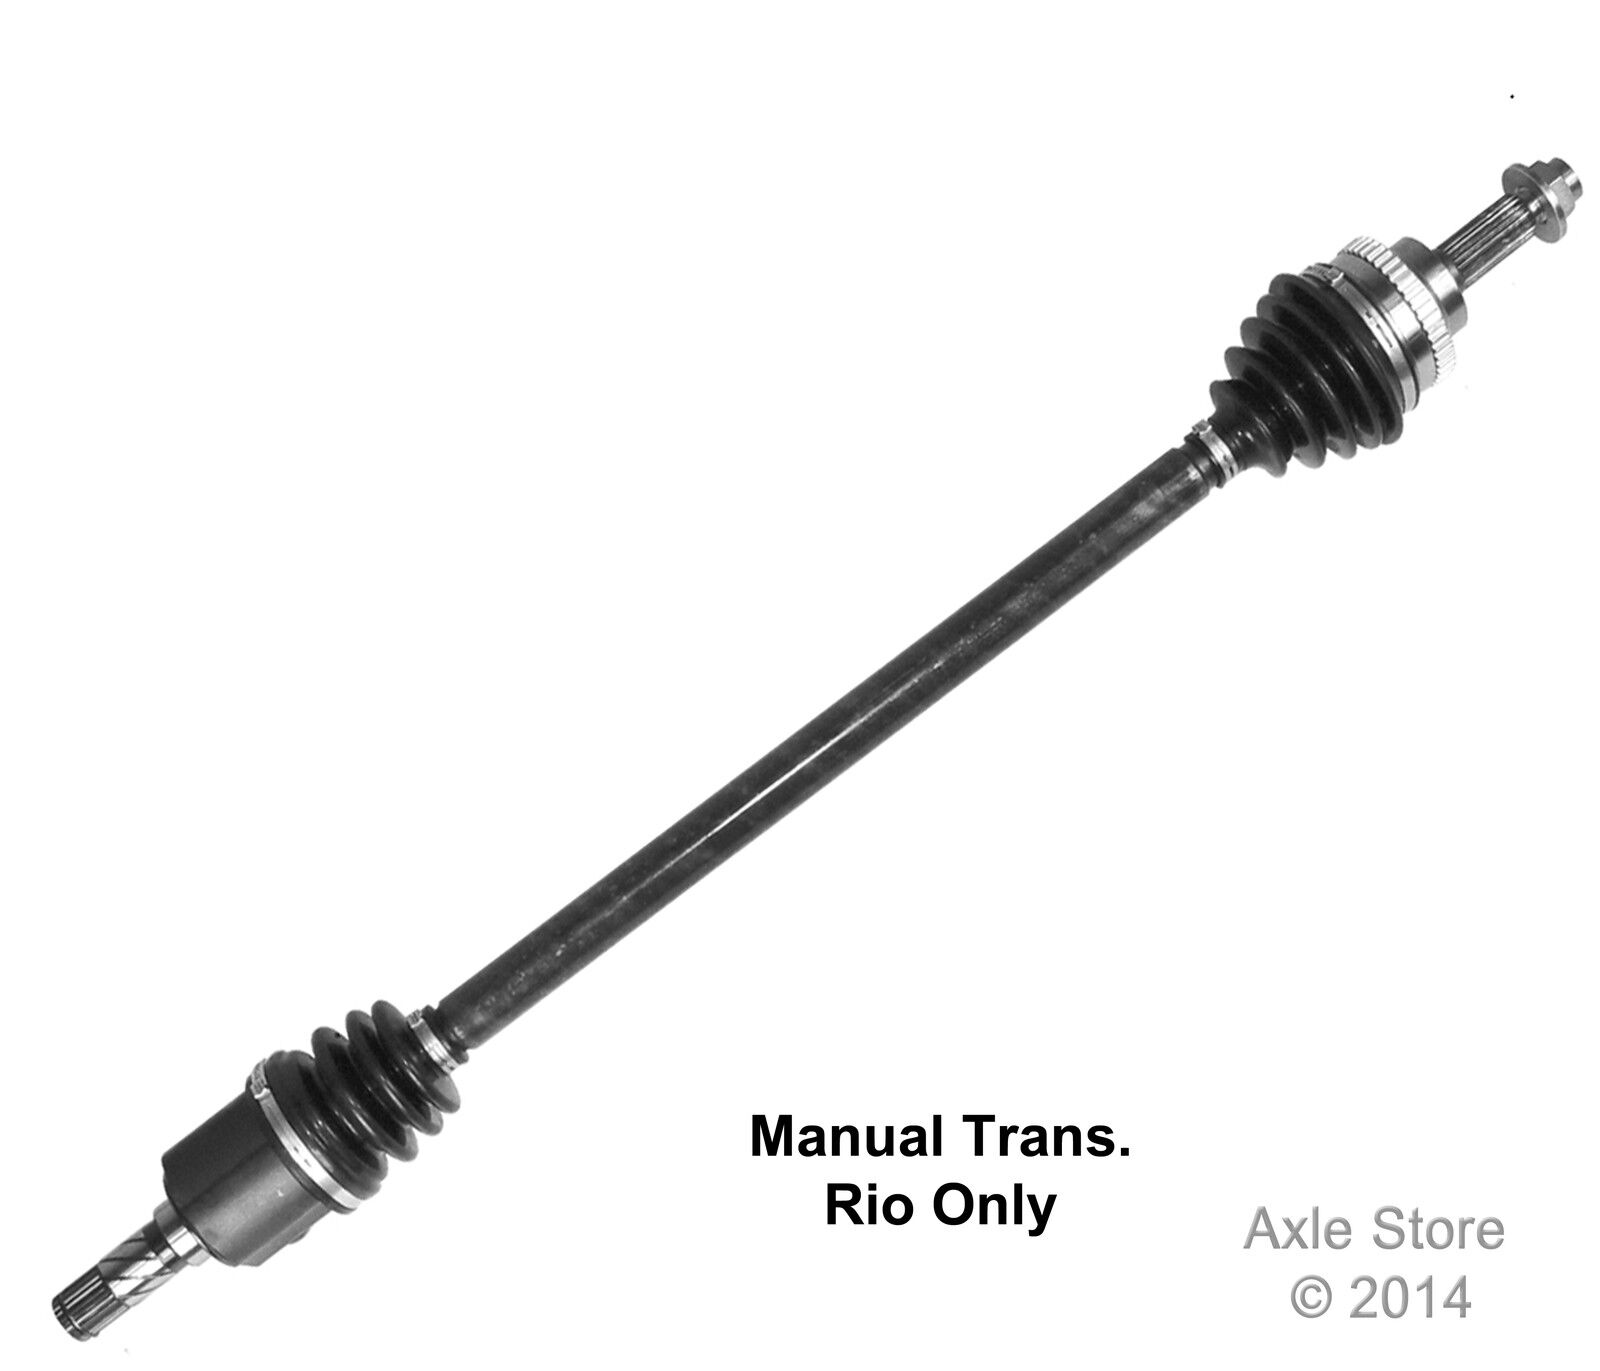 New CV Axle Front Right With Warranty Fits 2005 - 01 Kia Rio Manual Transmission